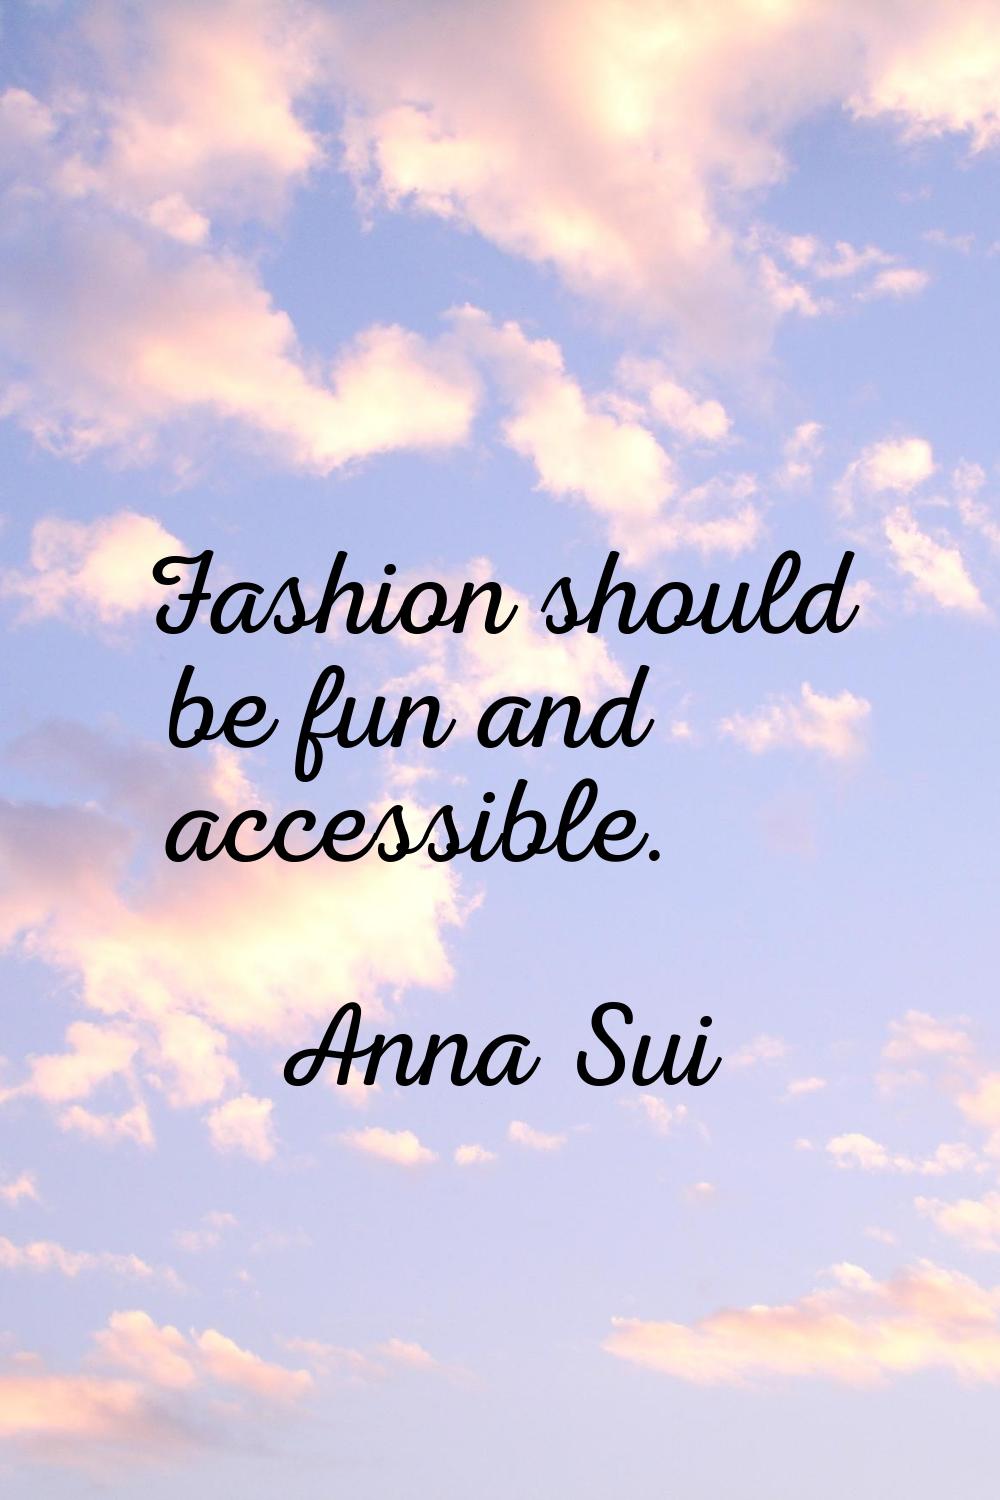 Fashion should be fun and accessible.